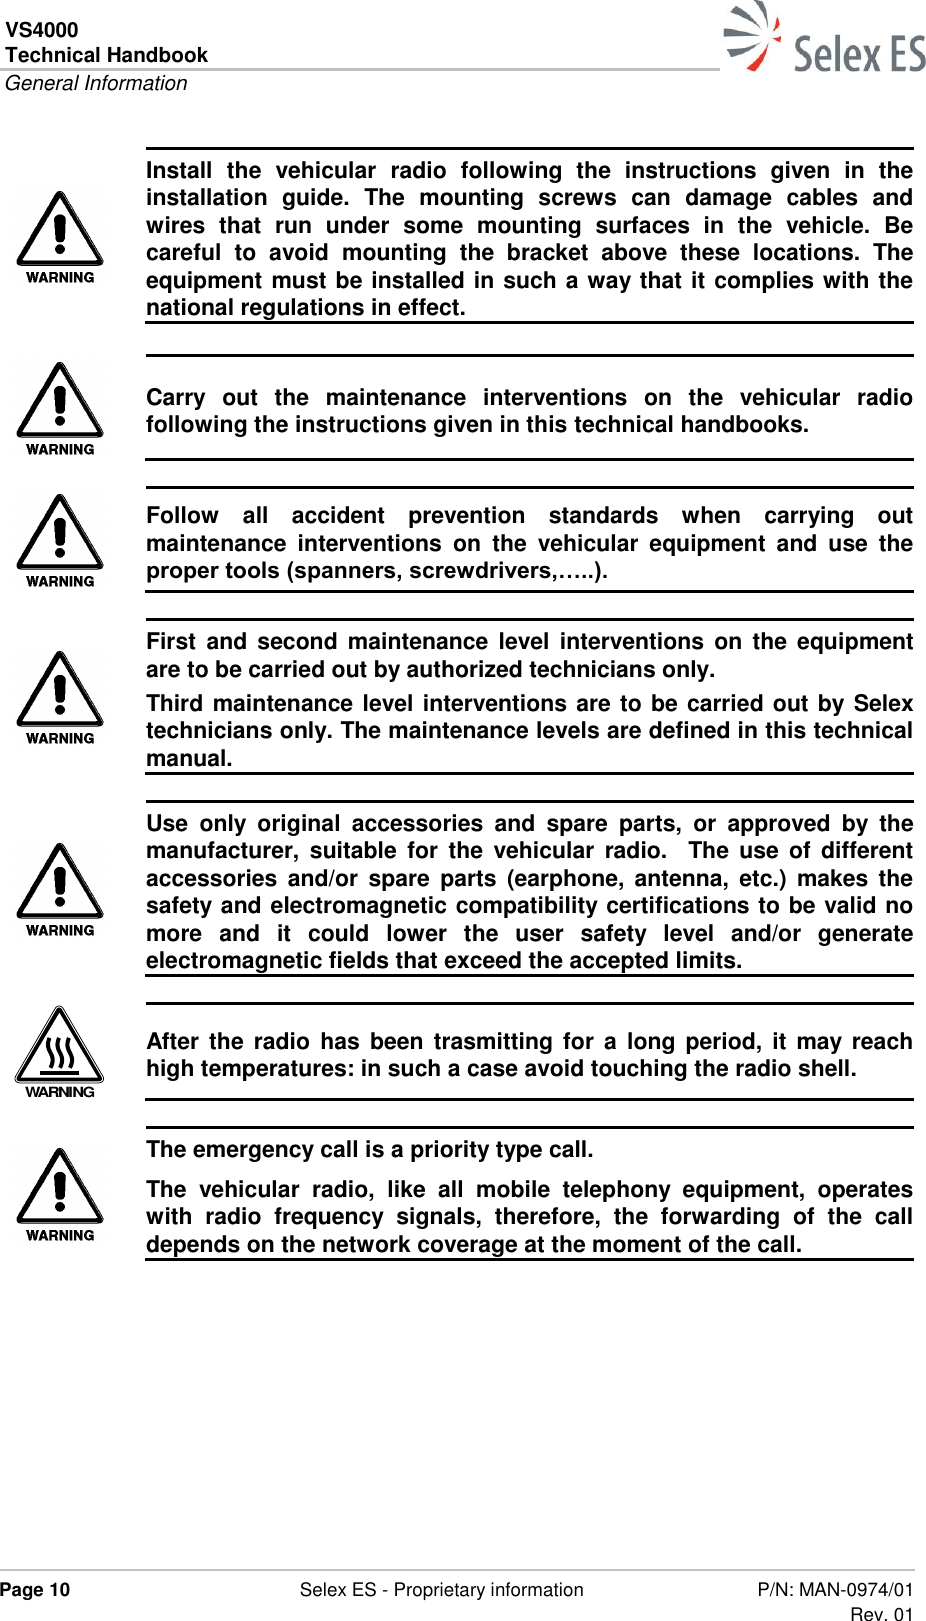 VS4000 Technical Handbook  General Information  Page 10  Selex ES - Proprietary information P/N: MAN-0974/01 Rev. 01   Install  the  vehicular  radio  following  the  instructions  given  in  the installation  guide.  The  mounting  screws  can  damage  cables  and wires  that  run  under  some  mounting  surfaces  in  the  vehicle.  Be careful  to  avoid  mounting  the  bracket  above  these  locations.  The equipment must be installed in such a way that it complies with the national regulations in effect.   Carry  out  the  maintenance  interventions  on  the  vehicular  radio following the instructions given in this technical handbooks.   Follow  all  accident  prevention  standards  when  carrying  out maintenance  interventions  on  the  vehicular  equipment  and  use  the proper tools (spanners, screwdrivers,…..).   First  and second  maintenance  level  interventions  on  the  equipment are to be carried out by authorized technicians only.  Third maintenance level interventions are to be carried out by Selex technicians only. The maintenance levels are defined in this technical manual.   Use  only  original  accessories  and  spare  parts,  or  approved  by  the manufacturer,  suitable  for  the  vehicular  radio.    The  use  of  different accessories  and/or  spare  parts  (earphone,  antenna,  etc.)  makes  the safety and electromagnetic compatibility certifications to be valid no more  and  it  could  lower  the  user  safety  level  and/or  generate electromagnetic fields that exceed the accepted limits.  WARNING After  the radio has  been  trasmitting  for  a  long  period,  it  may reach high temperatures: in such a case avoid touching the radio shell.   The emergency call is a priority type call. The  vehicular  radio,  like  all  mobile  telephony  equipment,  operates with  radio  frequency  signals,  therefore,  the  forwarding  of  the  call depends on the network coverage at the moment of the call.  